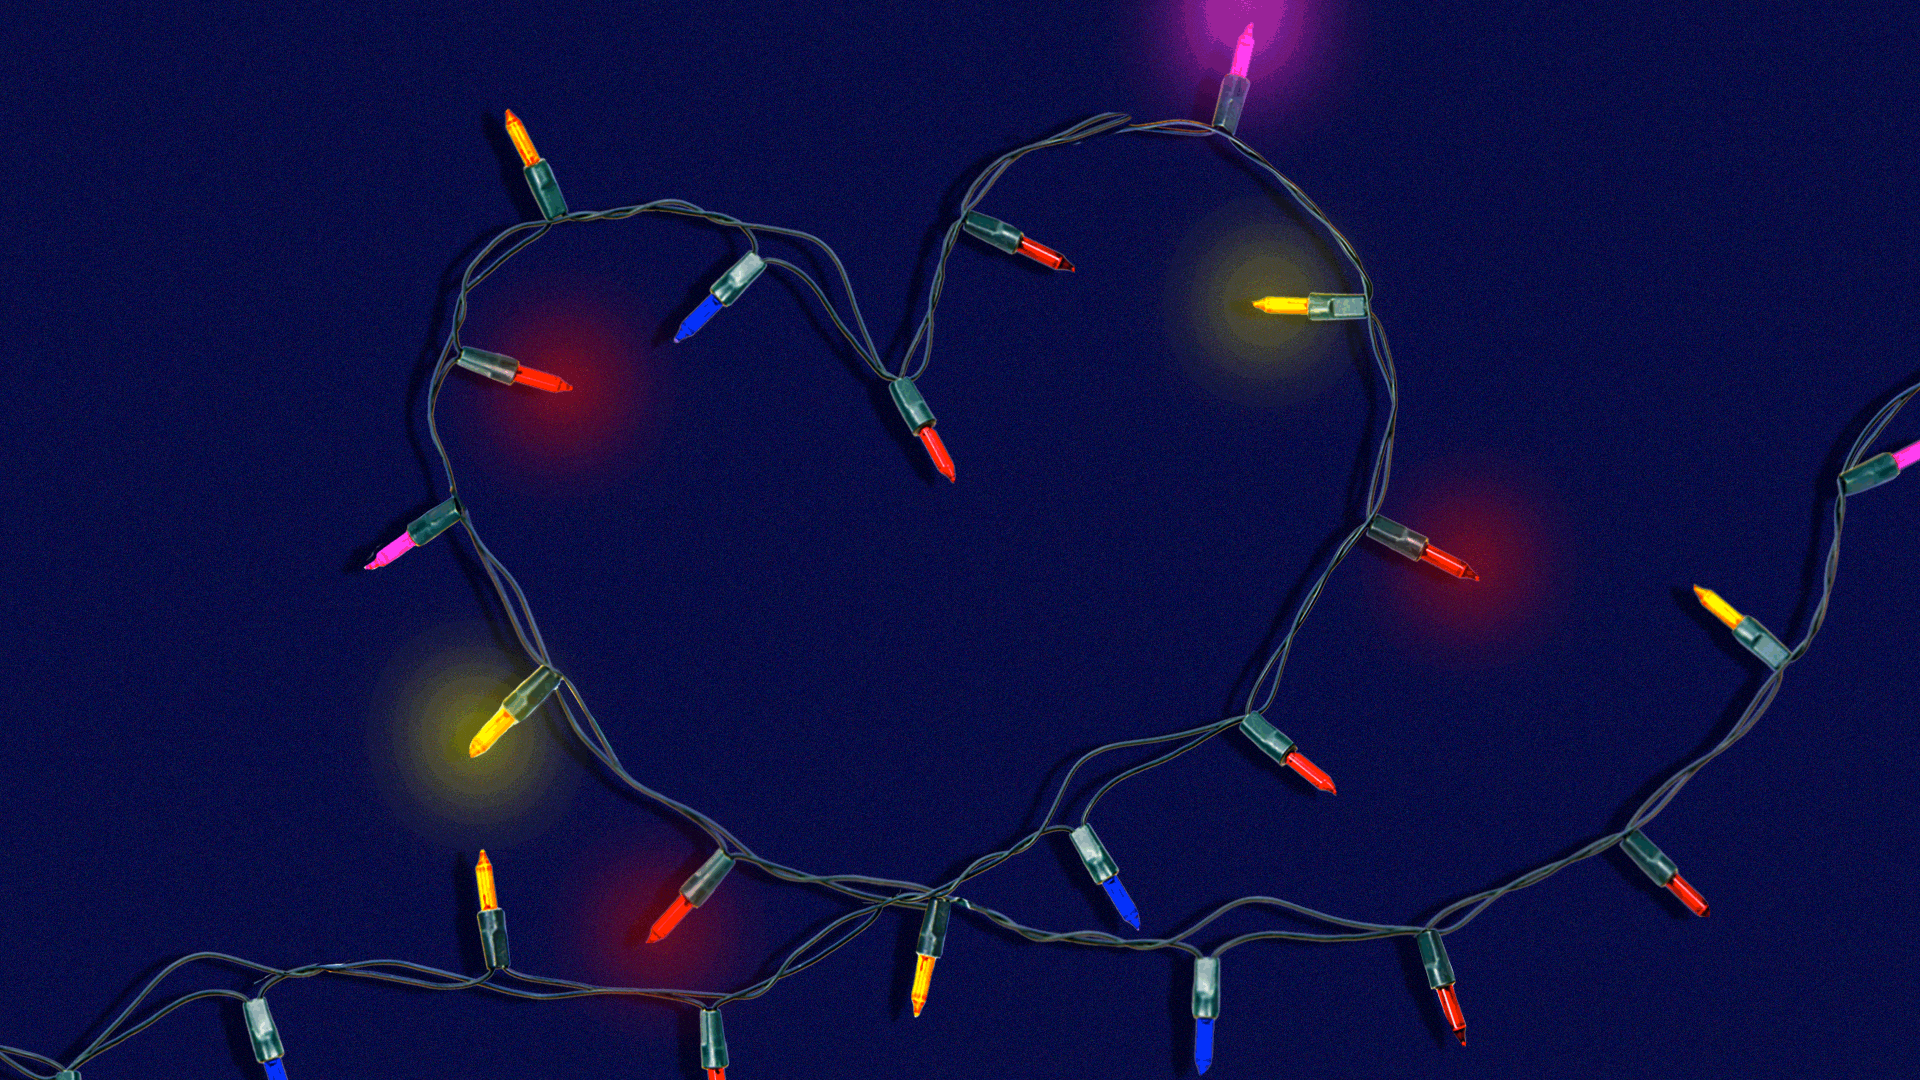 rainbow string lights in the shape of a heart blinking on and off